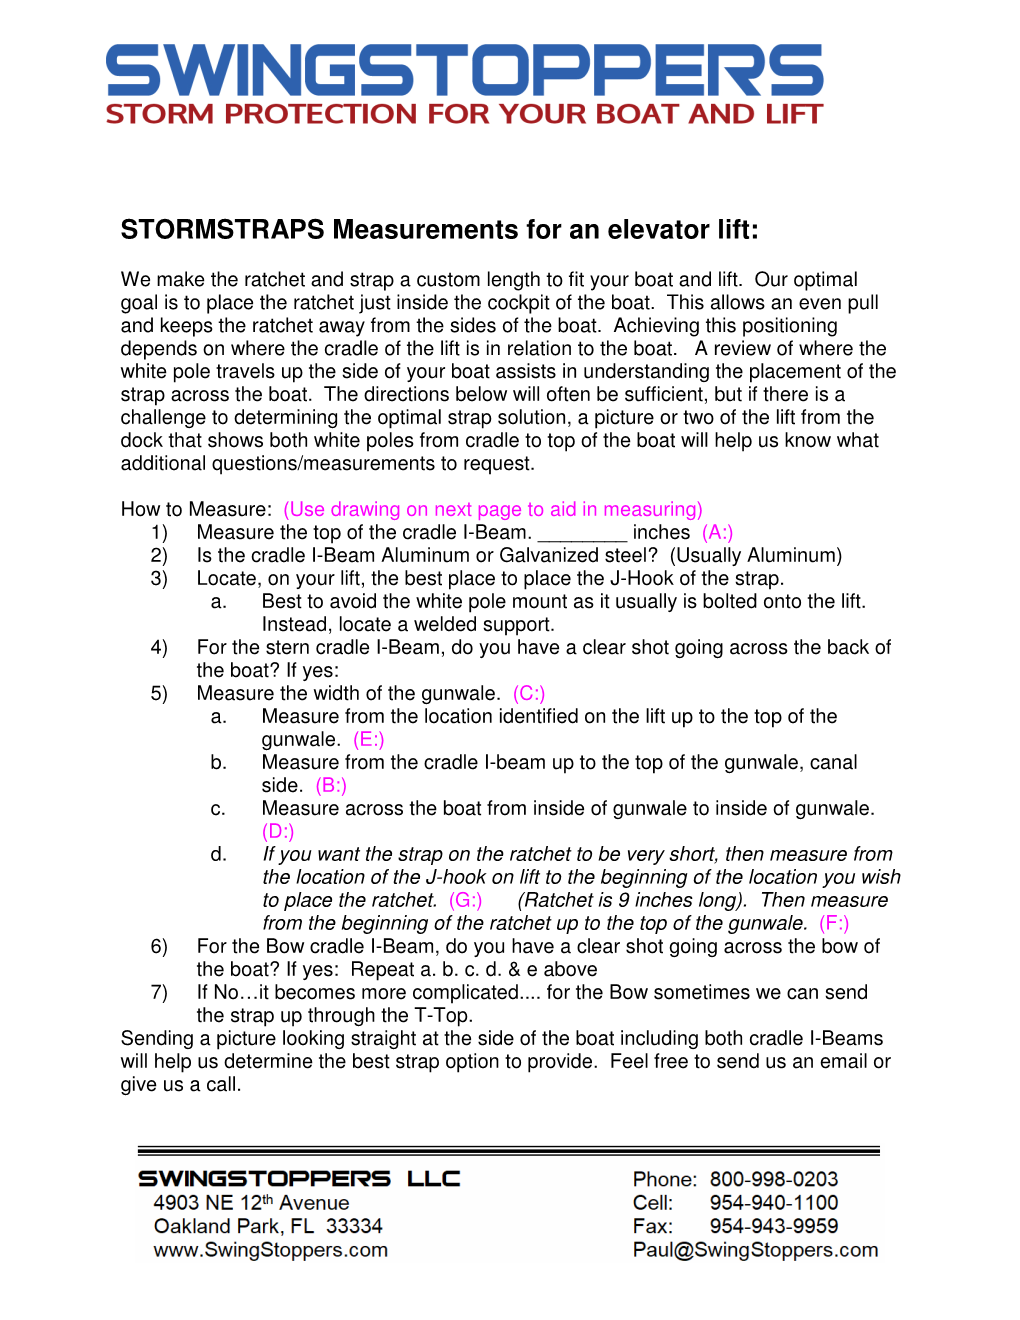 STORMSTRAPS Measurements for an Elevator Lift